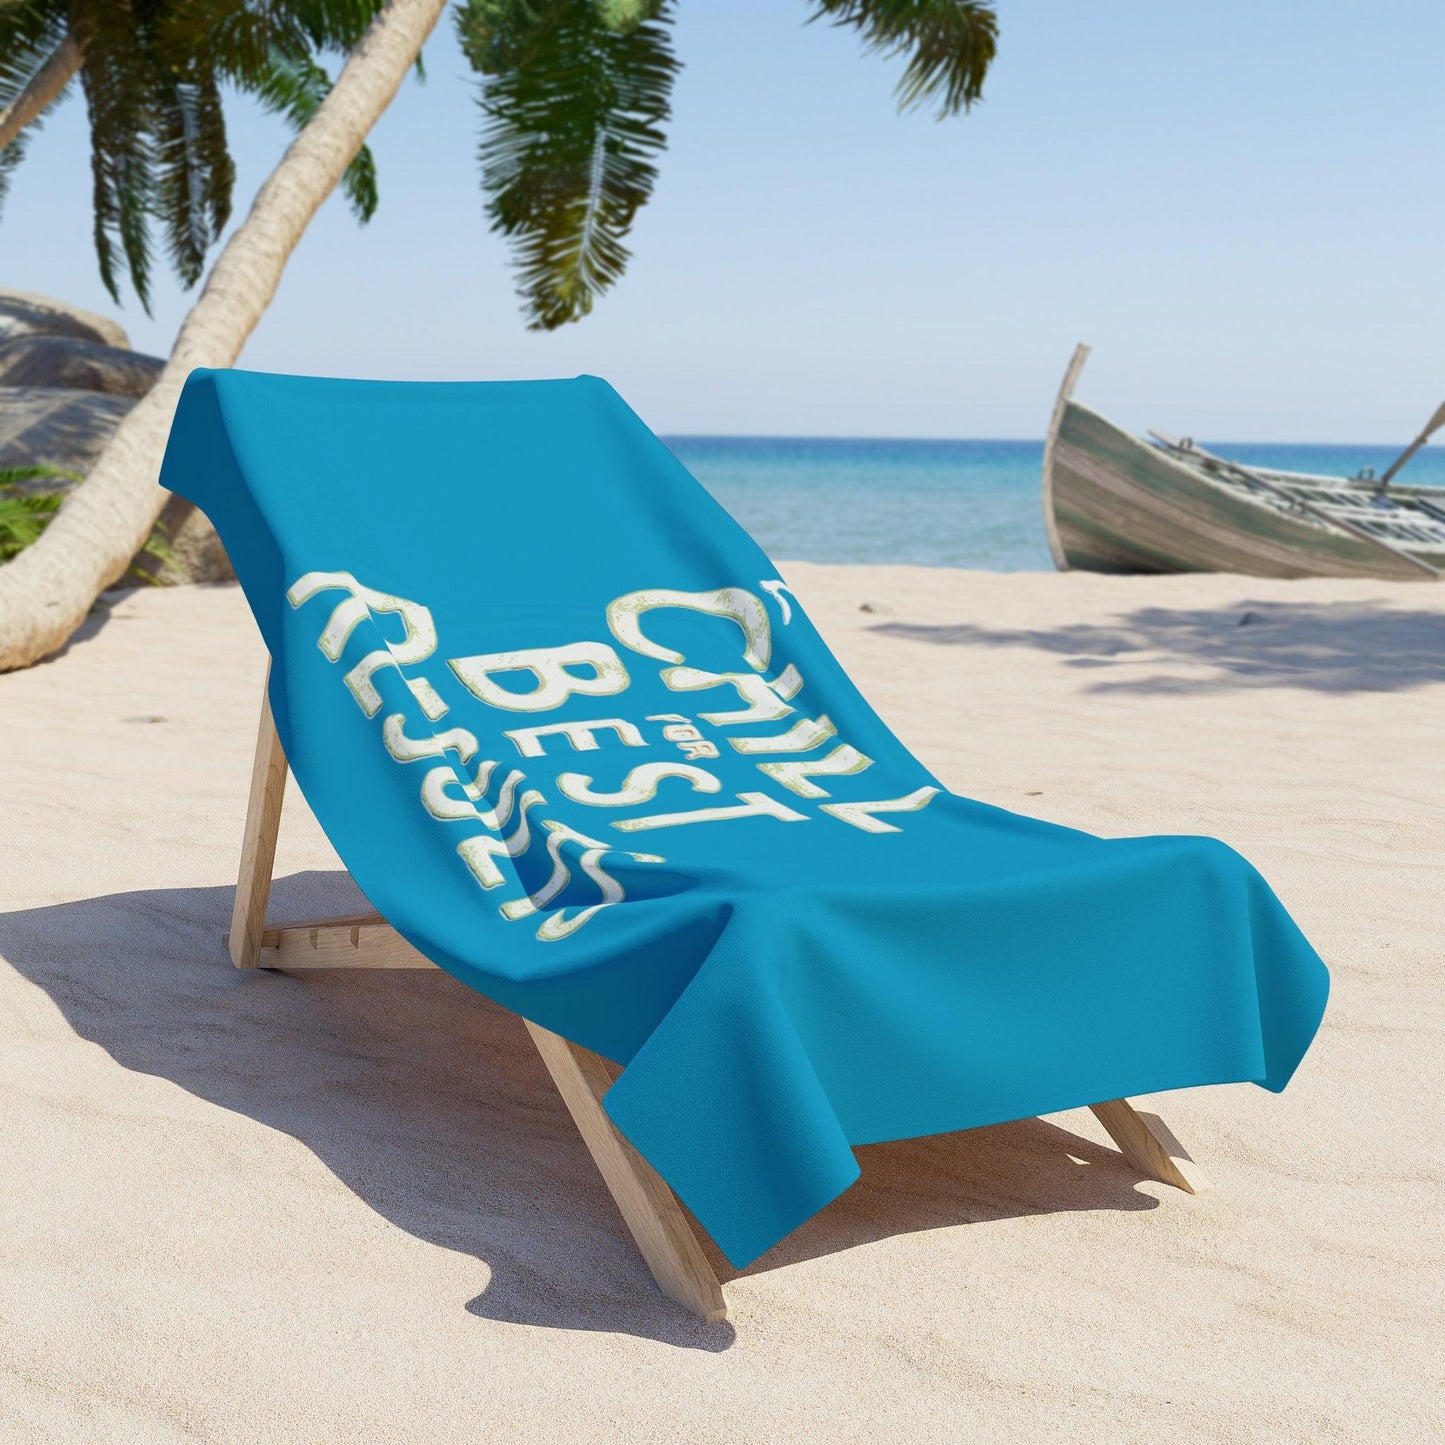 Chill for Best Results Beach Towel - Coastal Collections